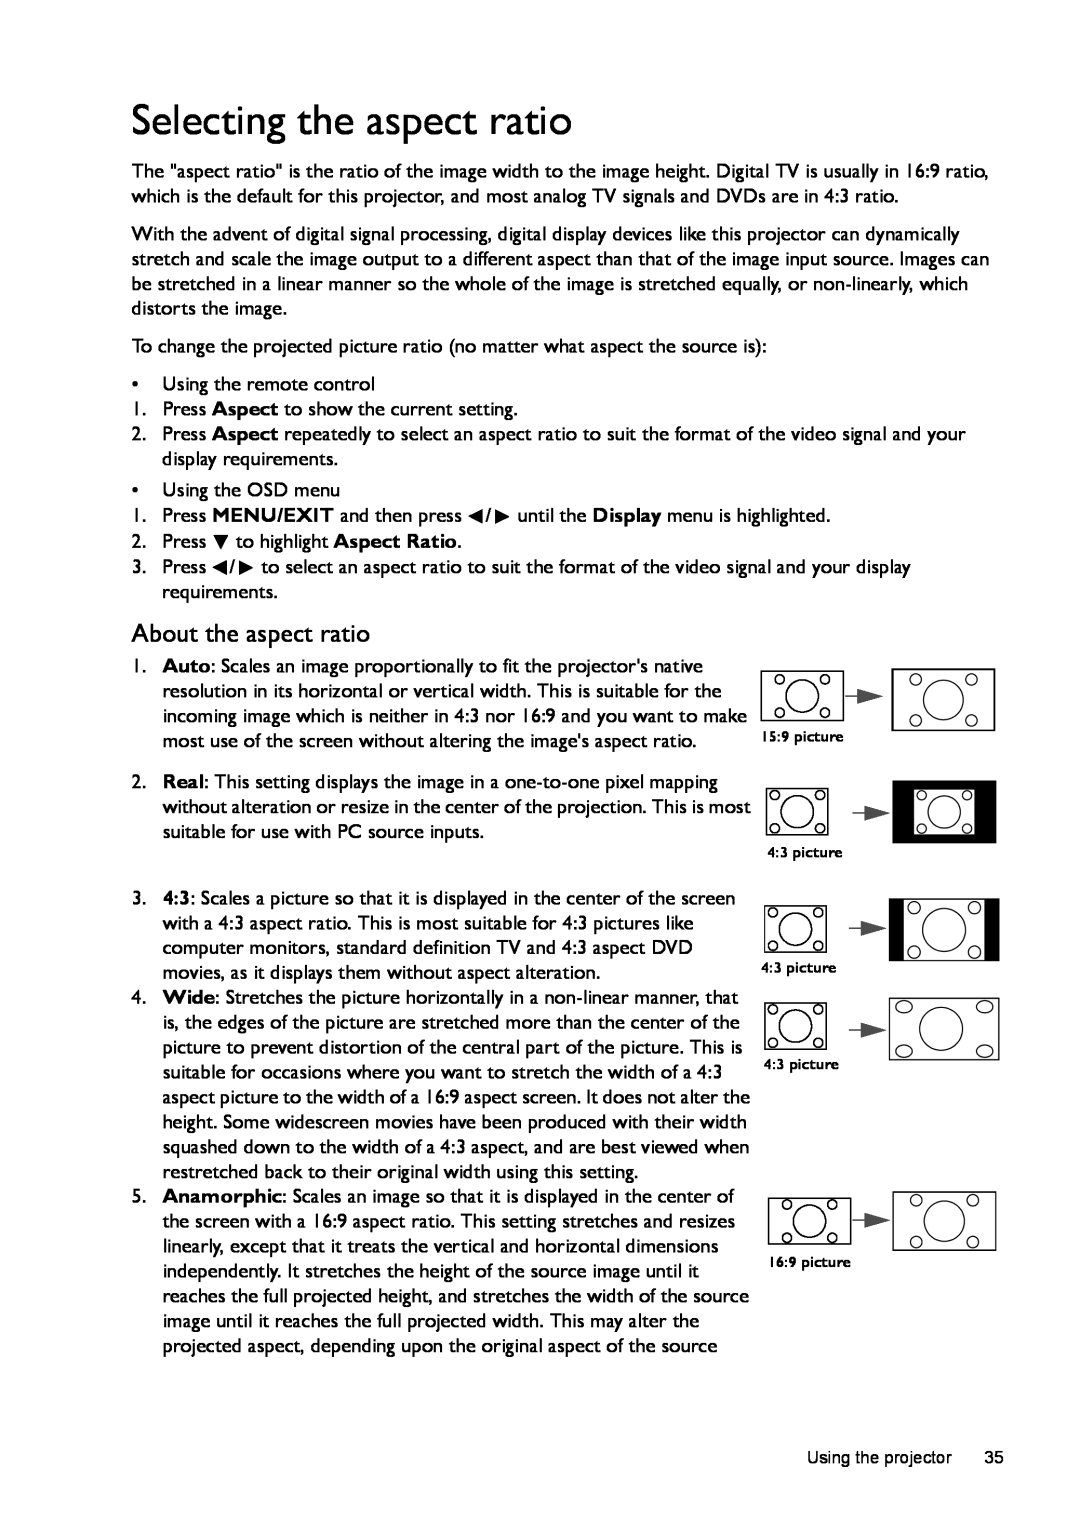 BenQ W770ST user manual Selecting the aspect ratio, About the aspect ratio 